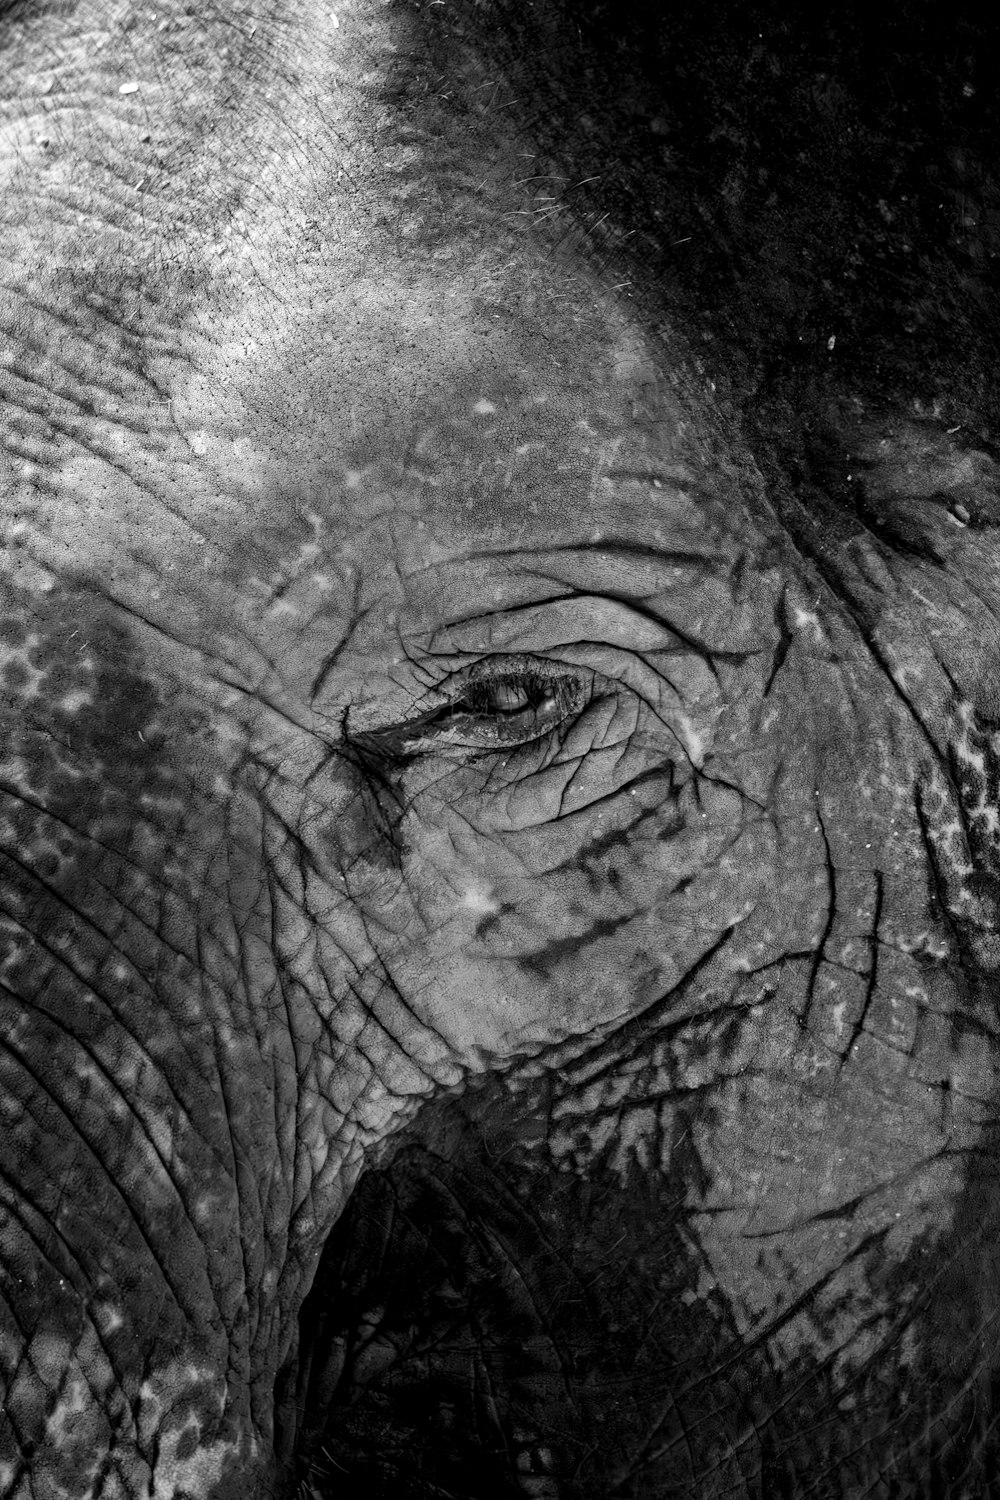 a close up of an elephant's face and trunk